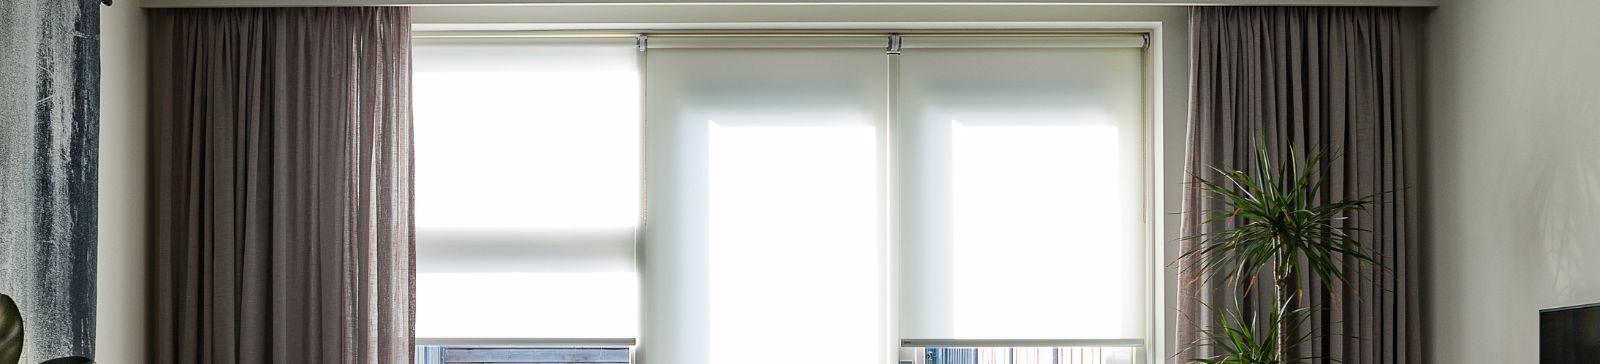 How to Get Motorized Window Shades Without Wires?